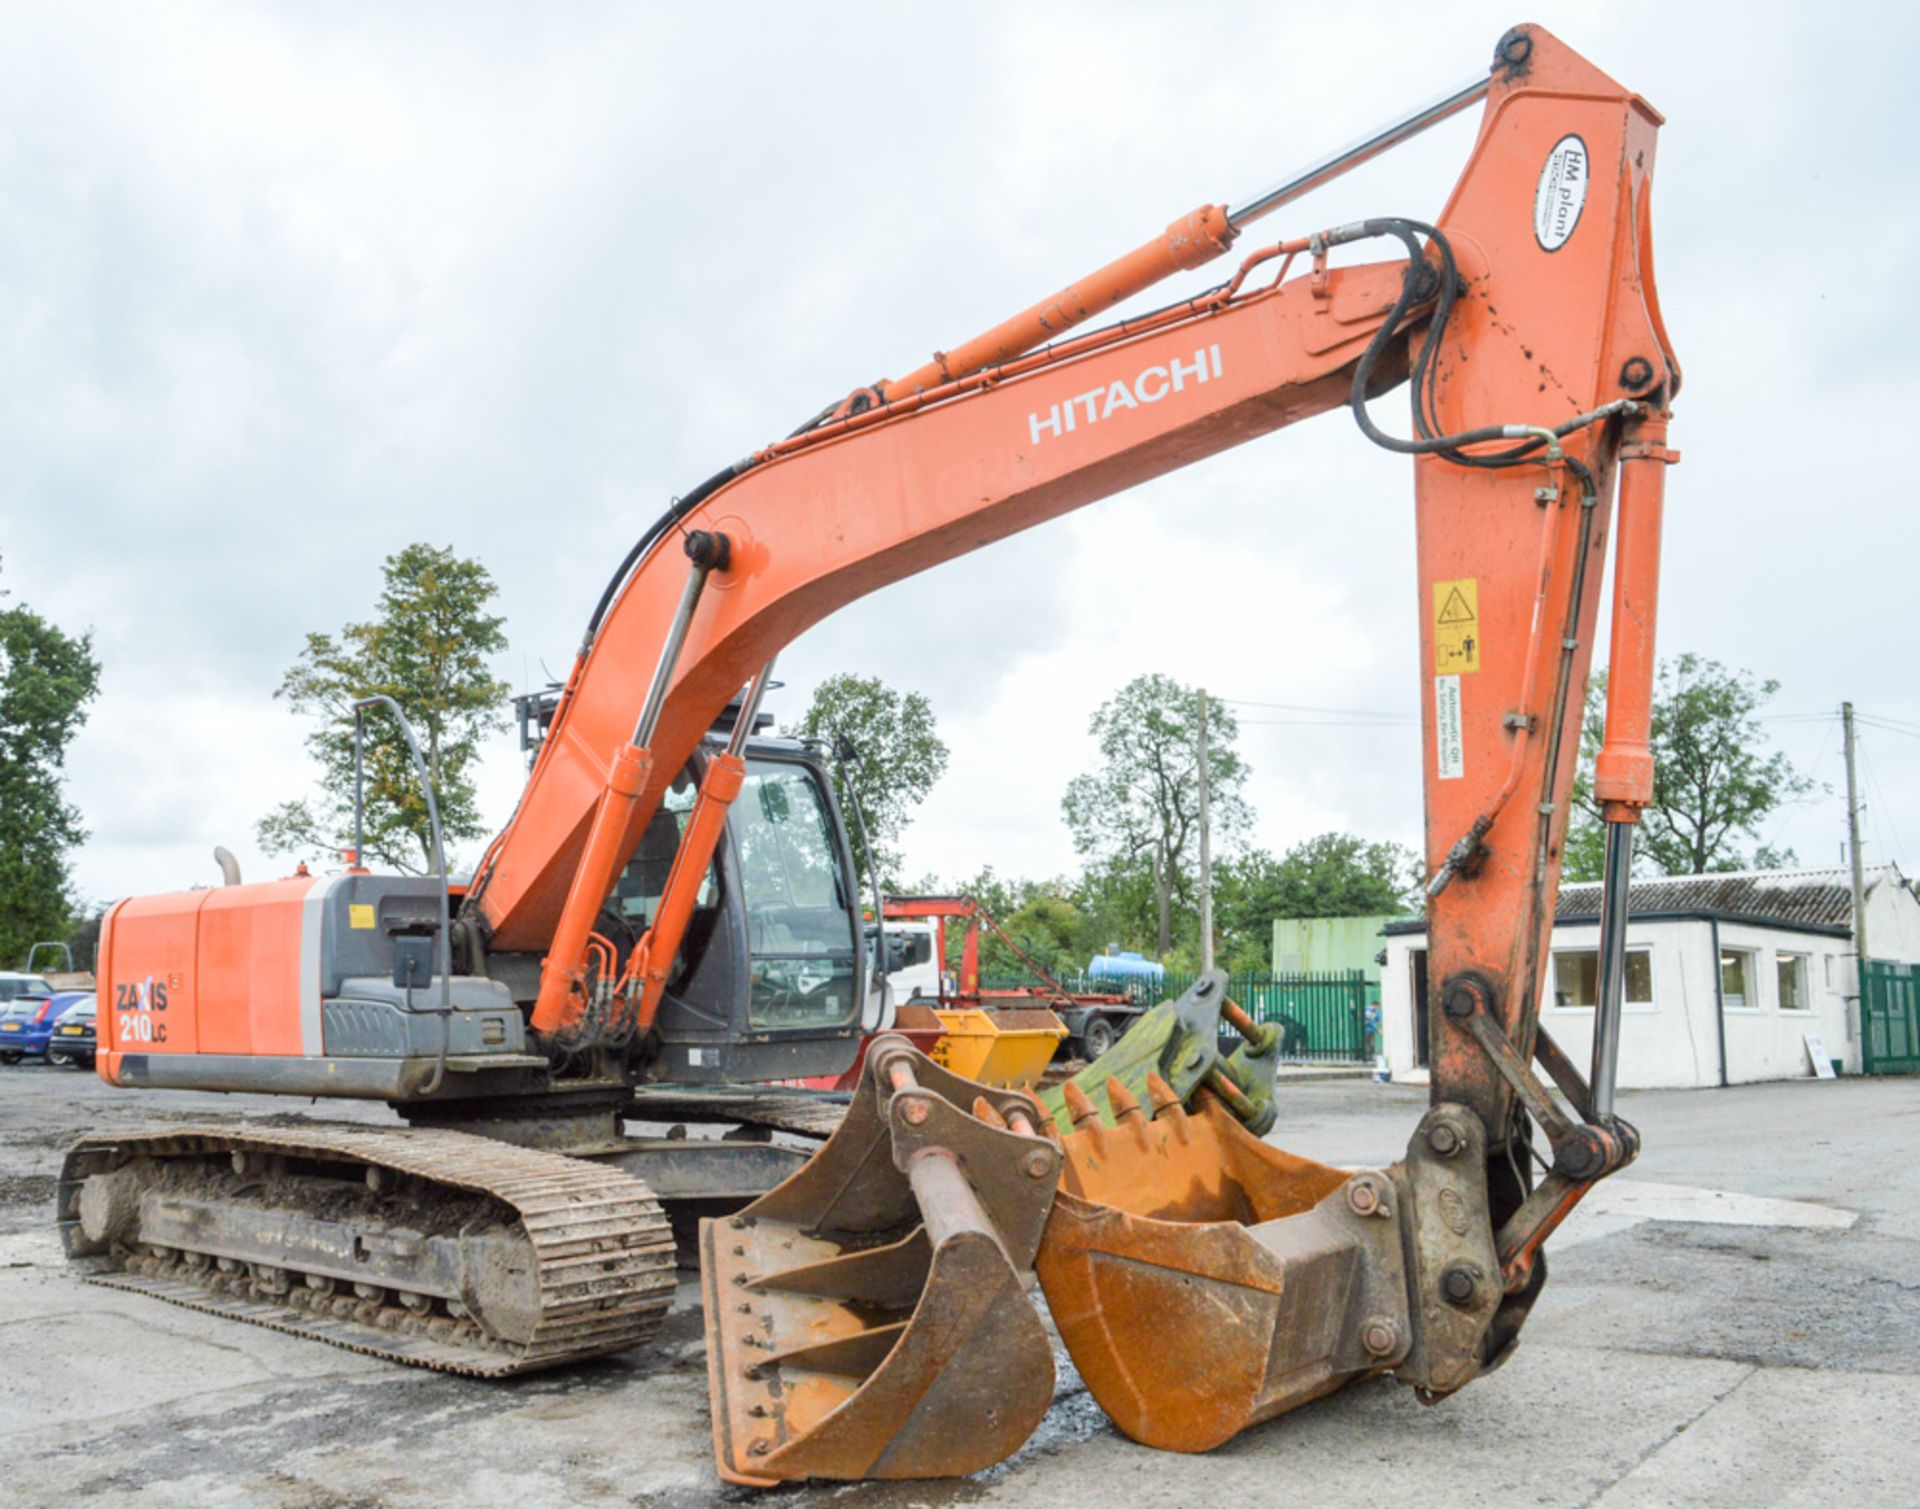 Hitachi Zaxis 210LC 21 tonne steel tracked excavator Year: 2008 S/N: 601306 Recorded Hours: 6876 - Image 4 of 15